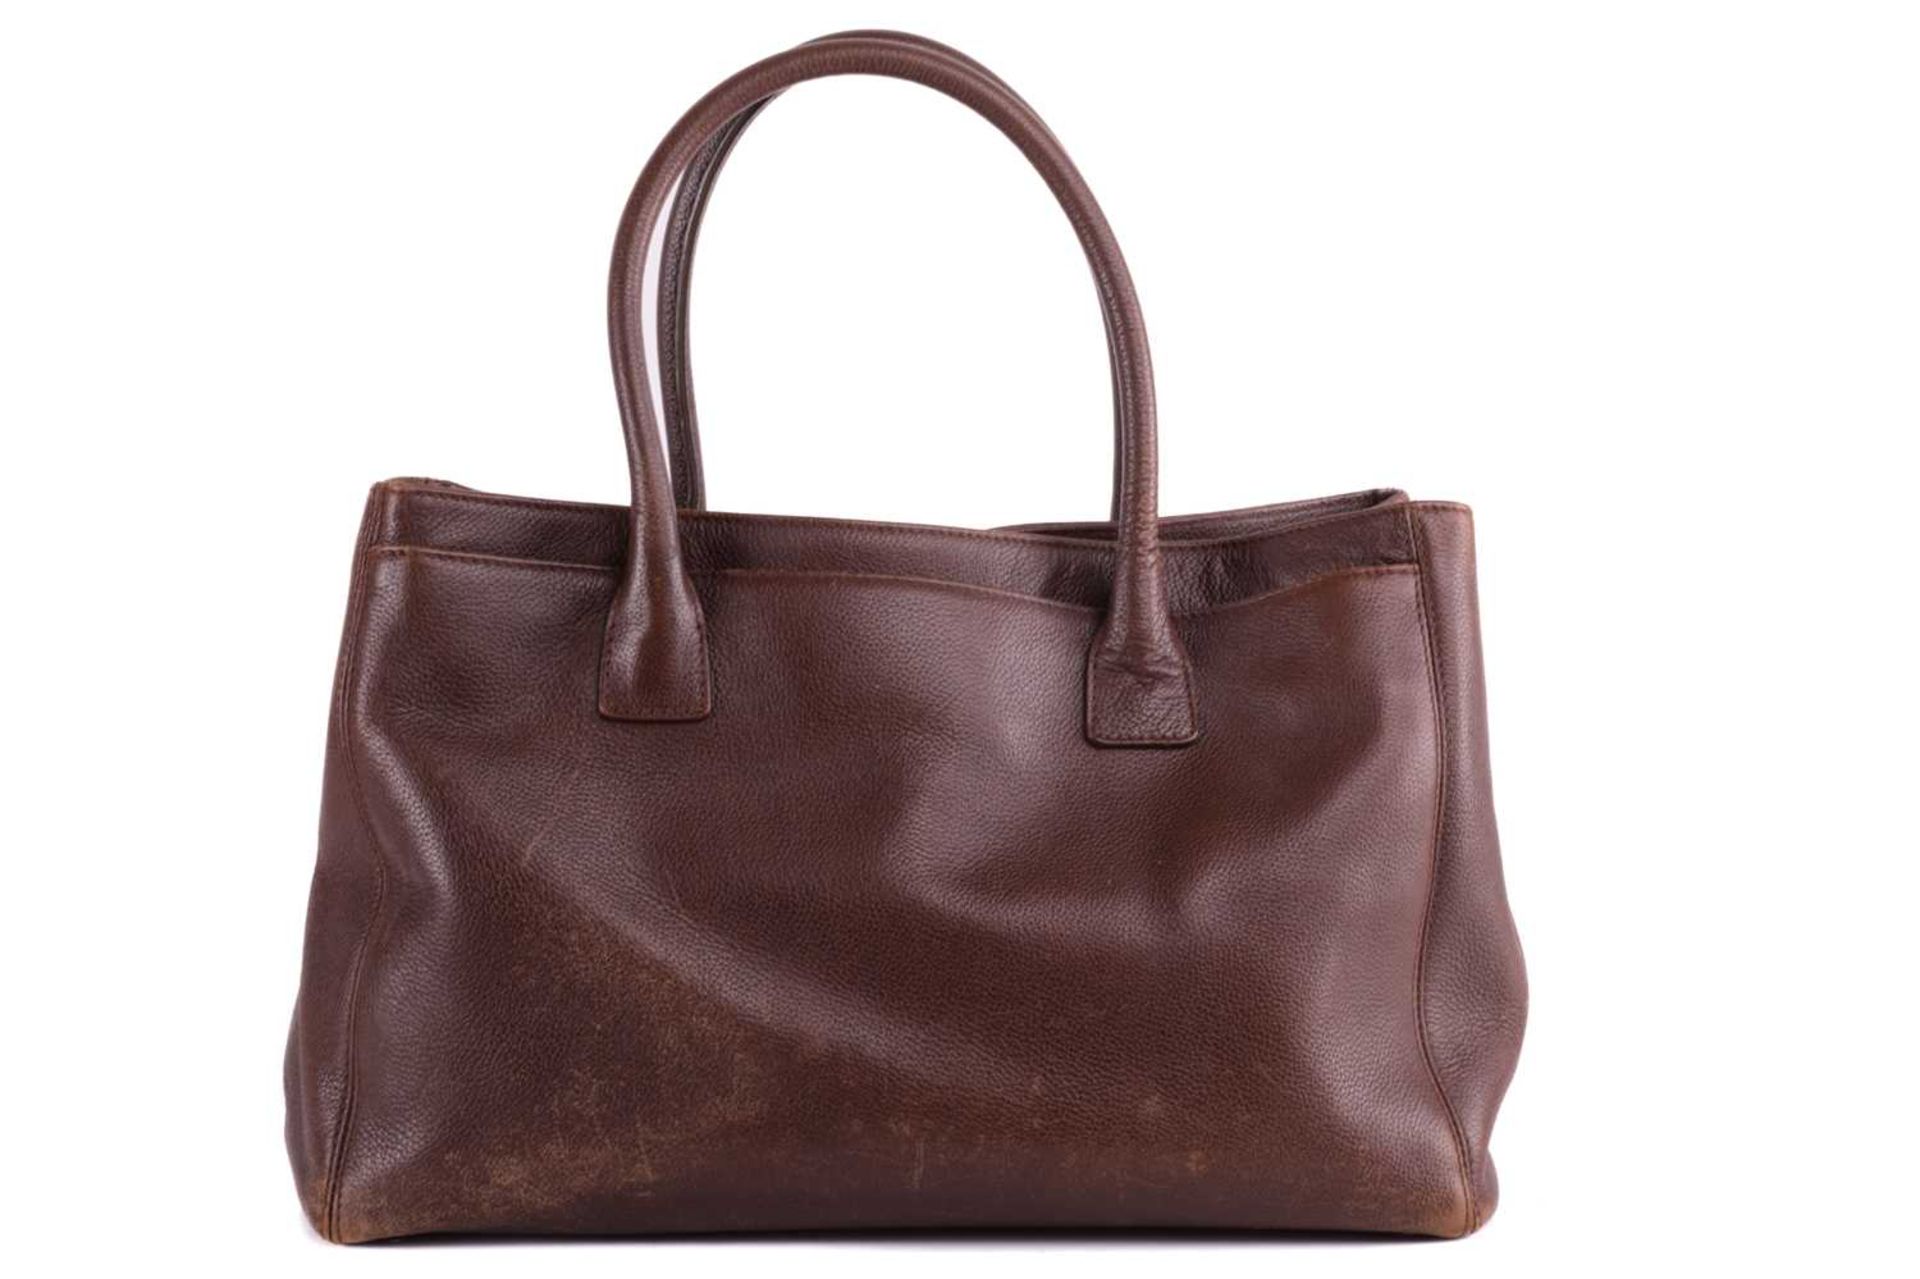 Chanel - an Executive tote bag in hazelnut brown grained leather, circa 1989, constructed with - Image 5 of 10